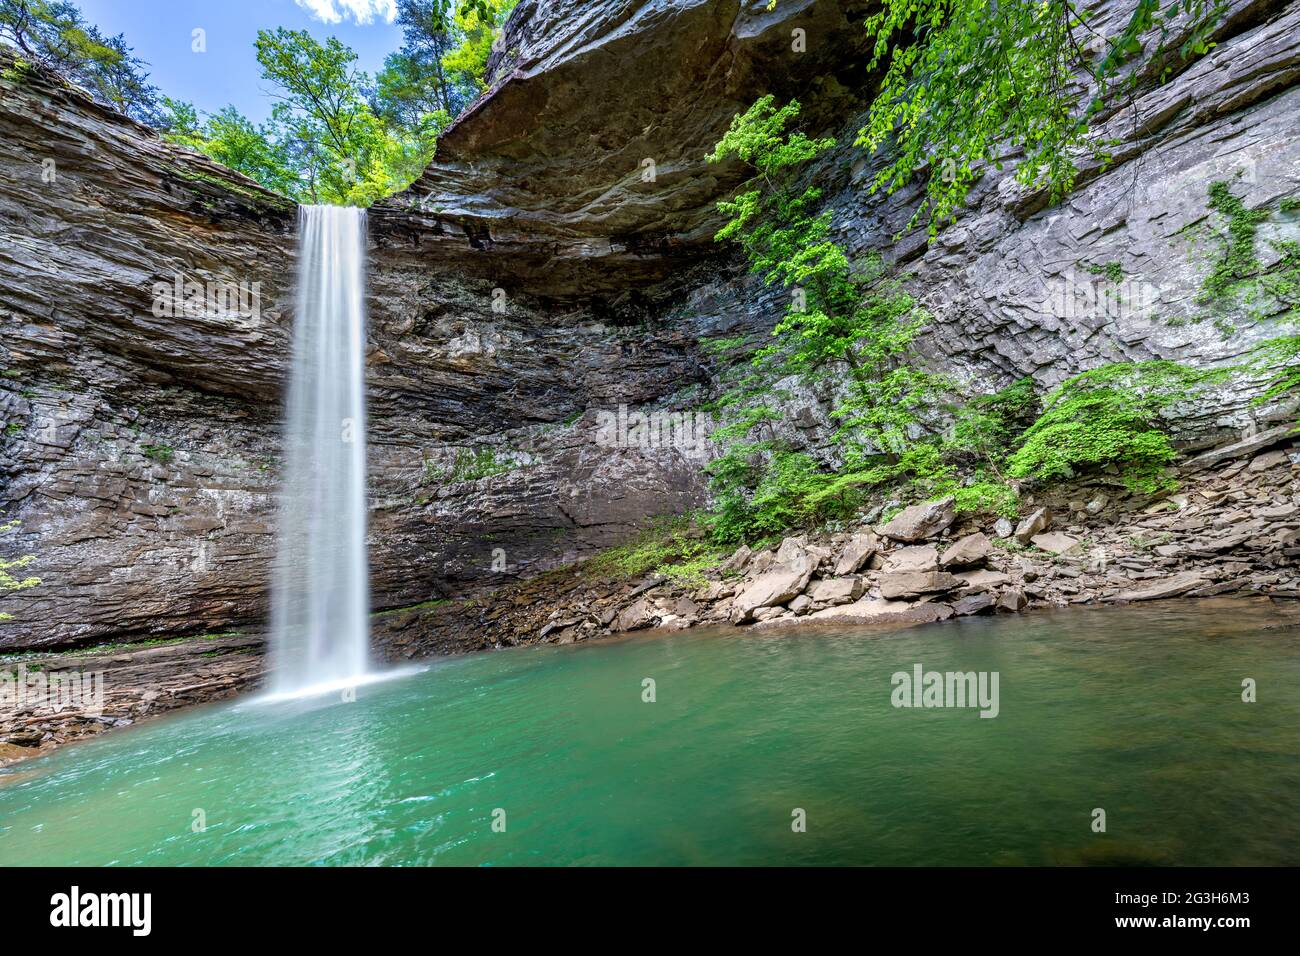 Beautiful Ozone Falls in Cumberland County Tennessee is a scenic swimming hole with a cool, cascading waterfall feeding the pool. Stock Photo